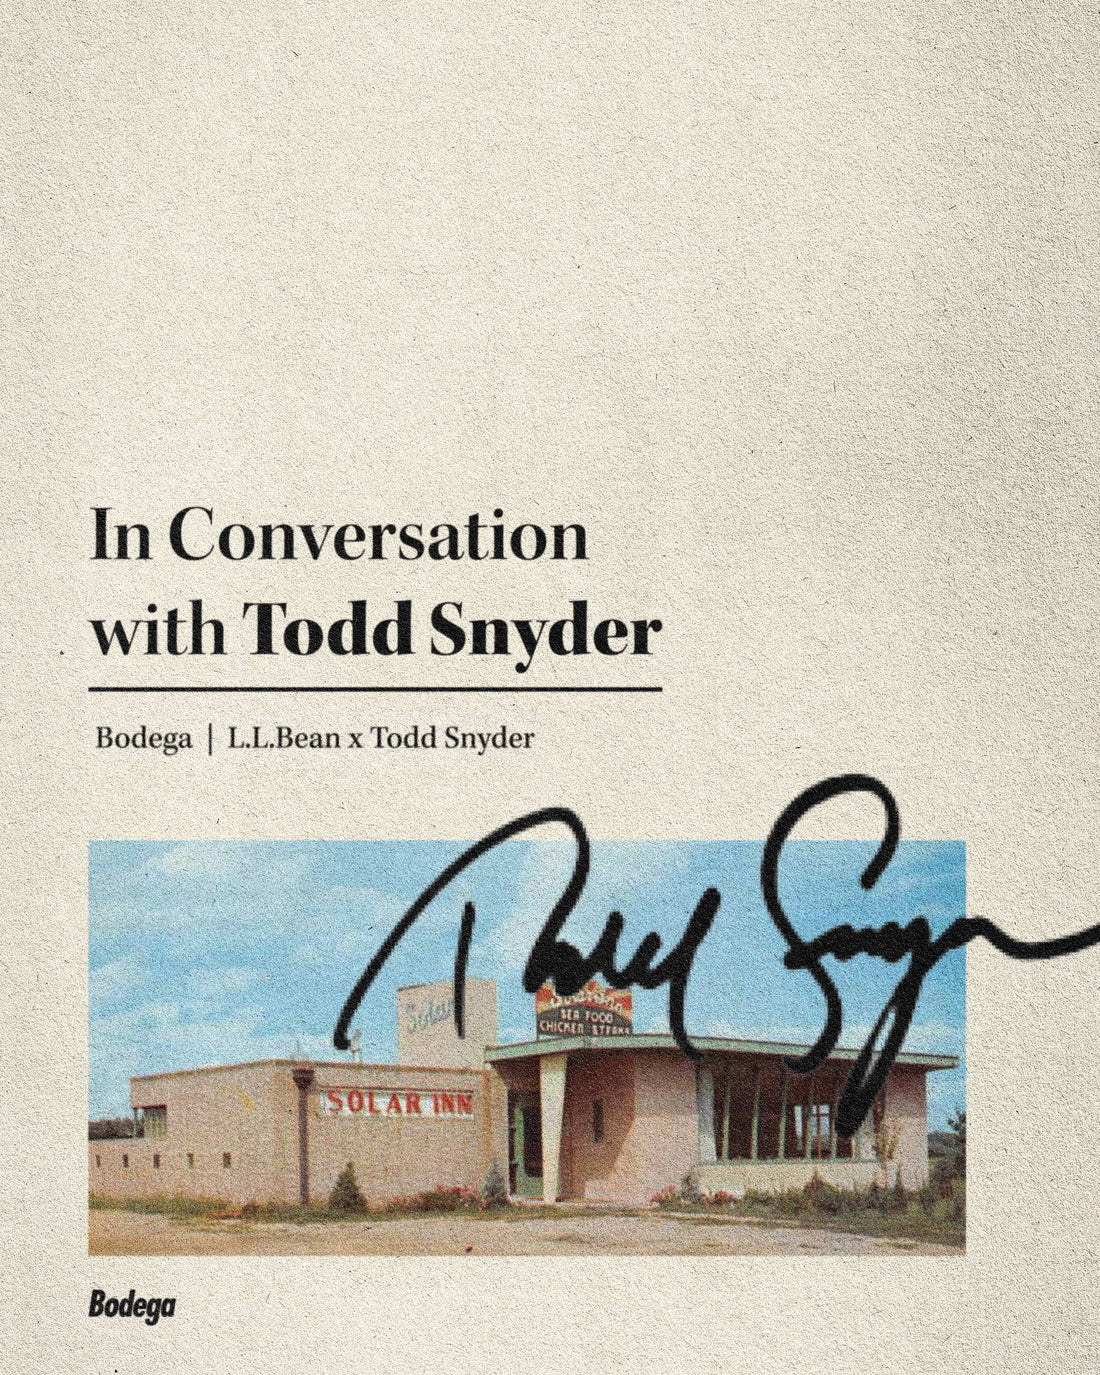 In Conversation with Todd Snyder